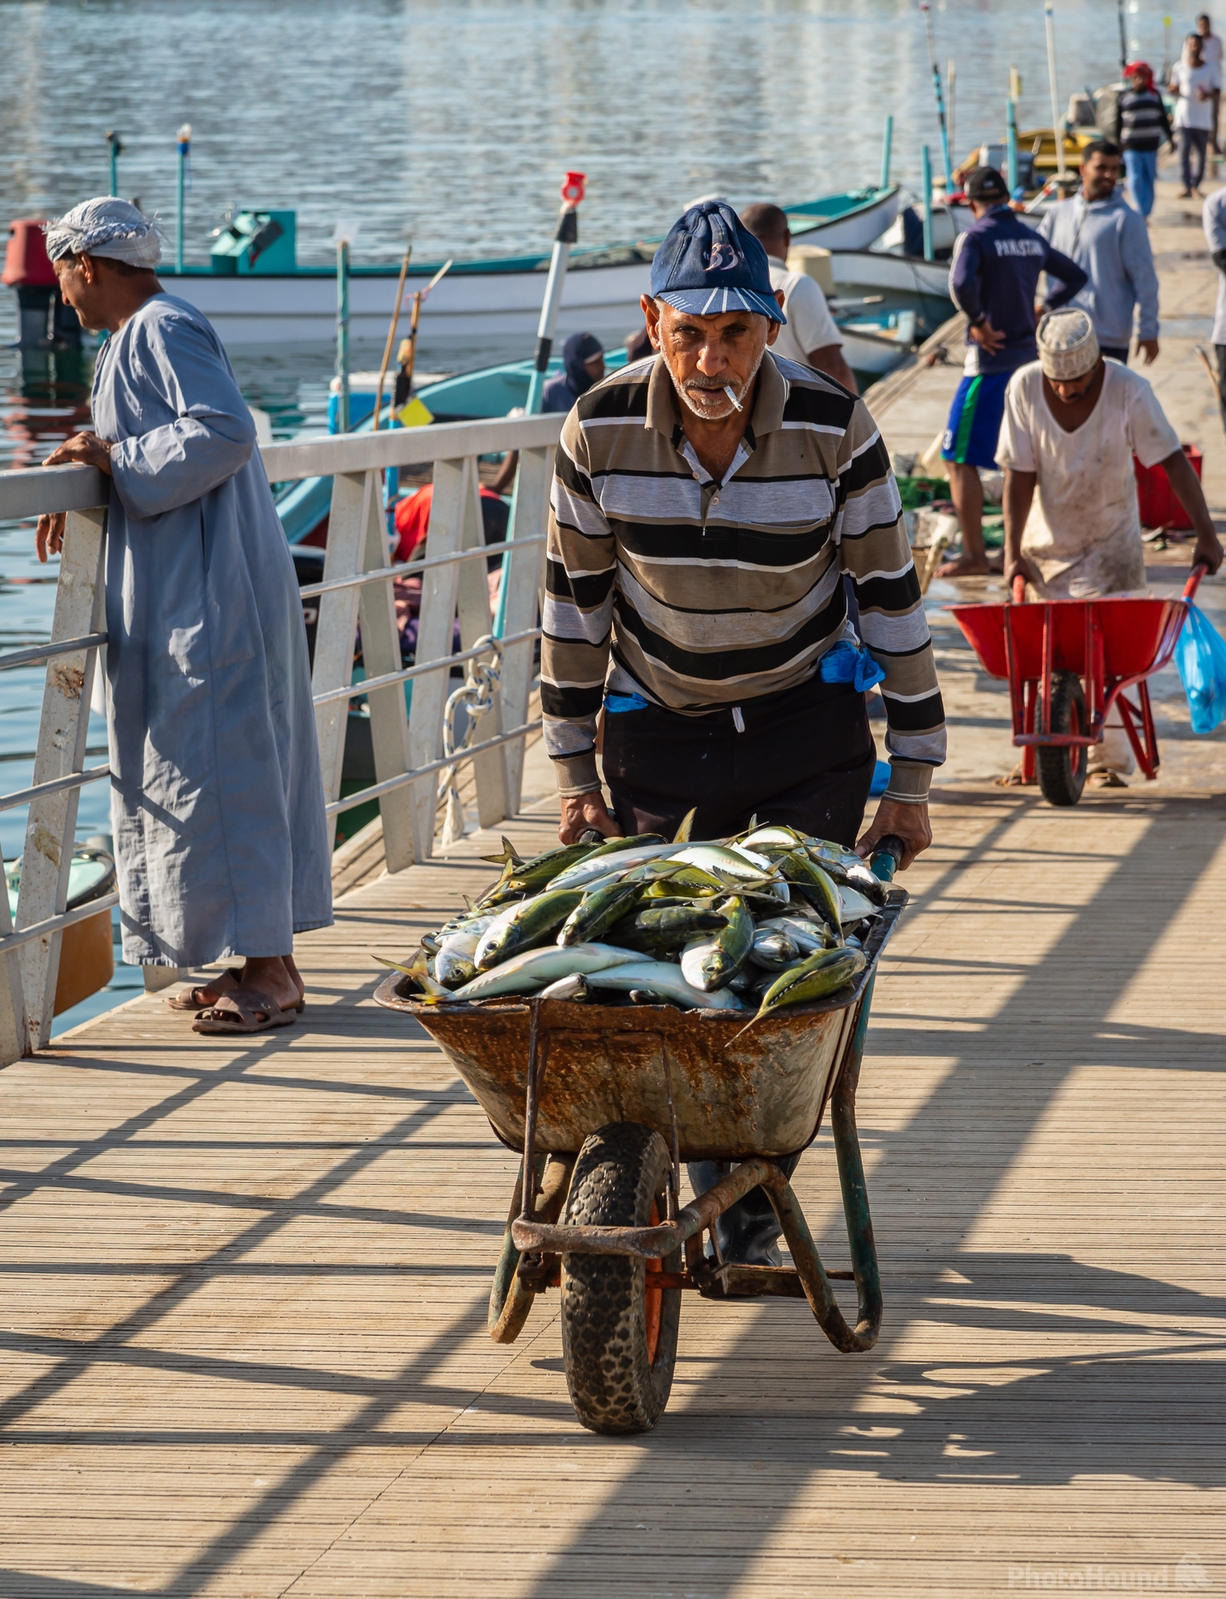 Image of Mutrah Fish Market, Muscat by Sue Wolfe